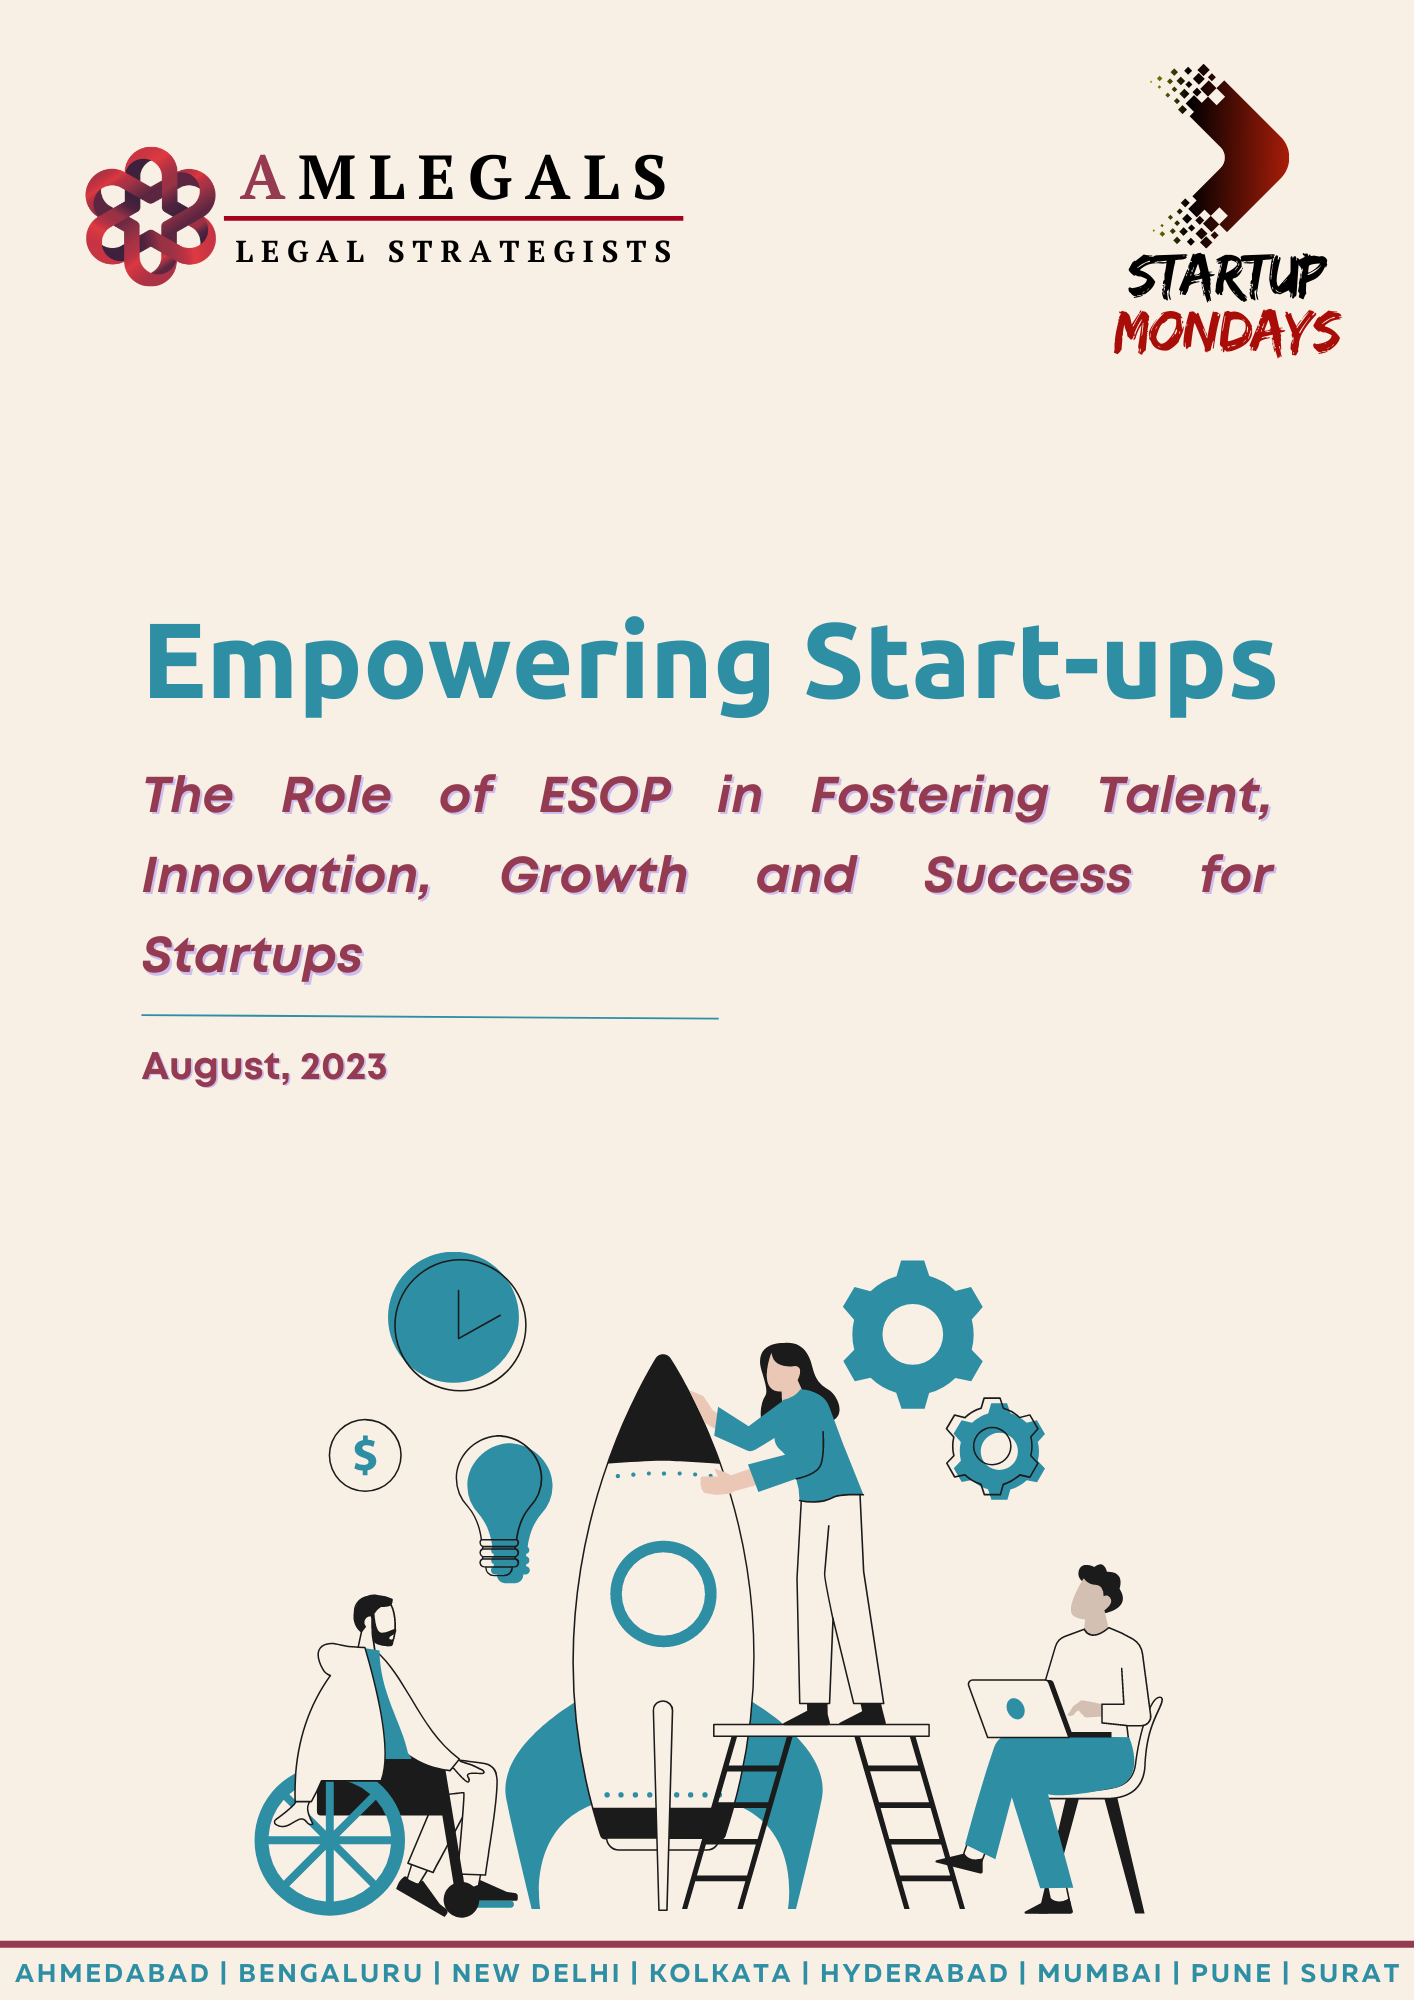 The Role of ESOP in Fostering Talent, Innovation, Growth and Success for Startups